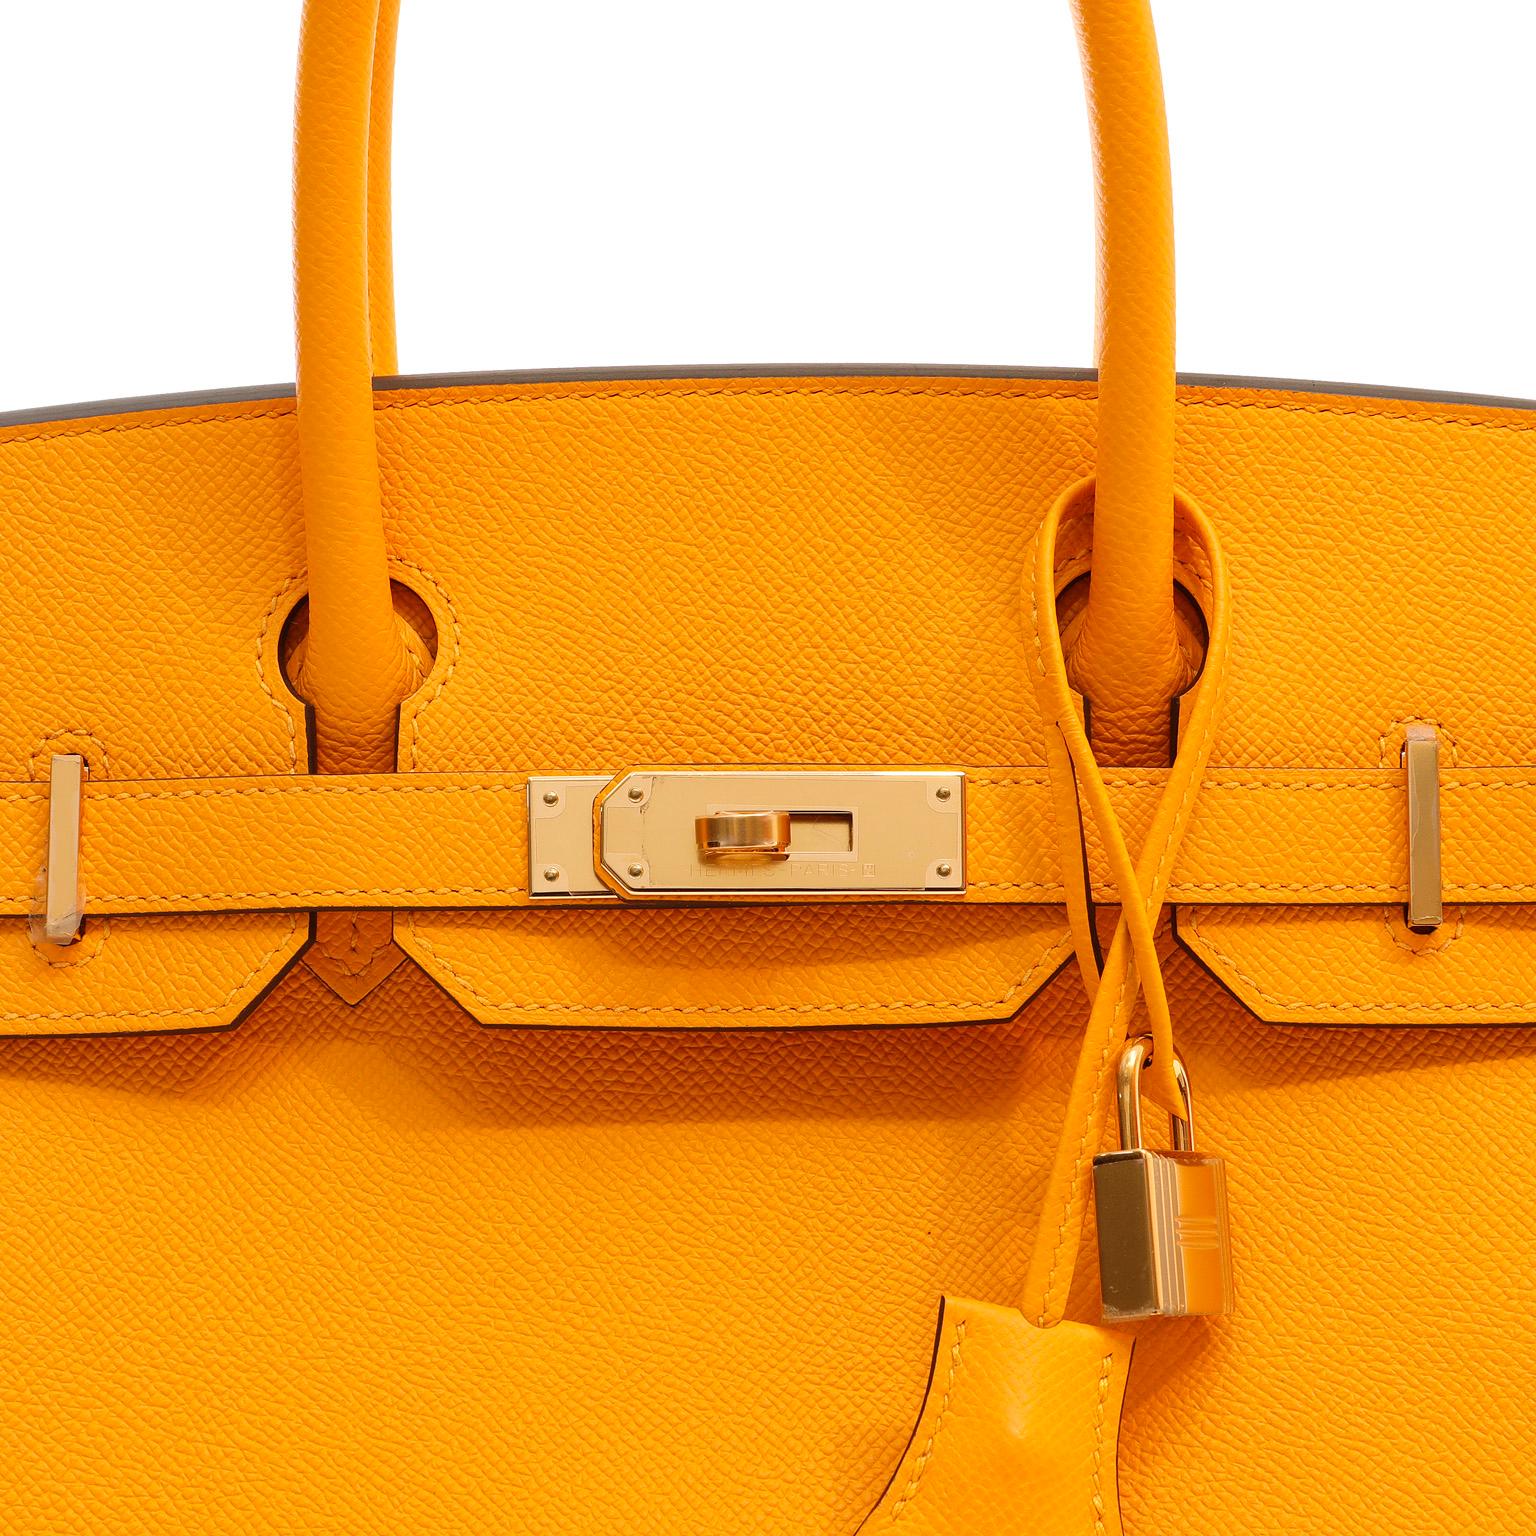 This authentic Hermès Marigold Epsom 30 cm Birkin is in pristine unworn condition with the plastic intact on the hardware. Specially ordered, this rare color is a striking shade of light orange yellow first introduced in 2012.

Epsom leather is